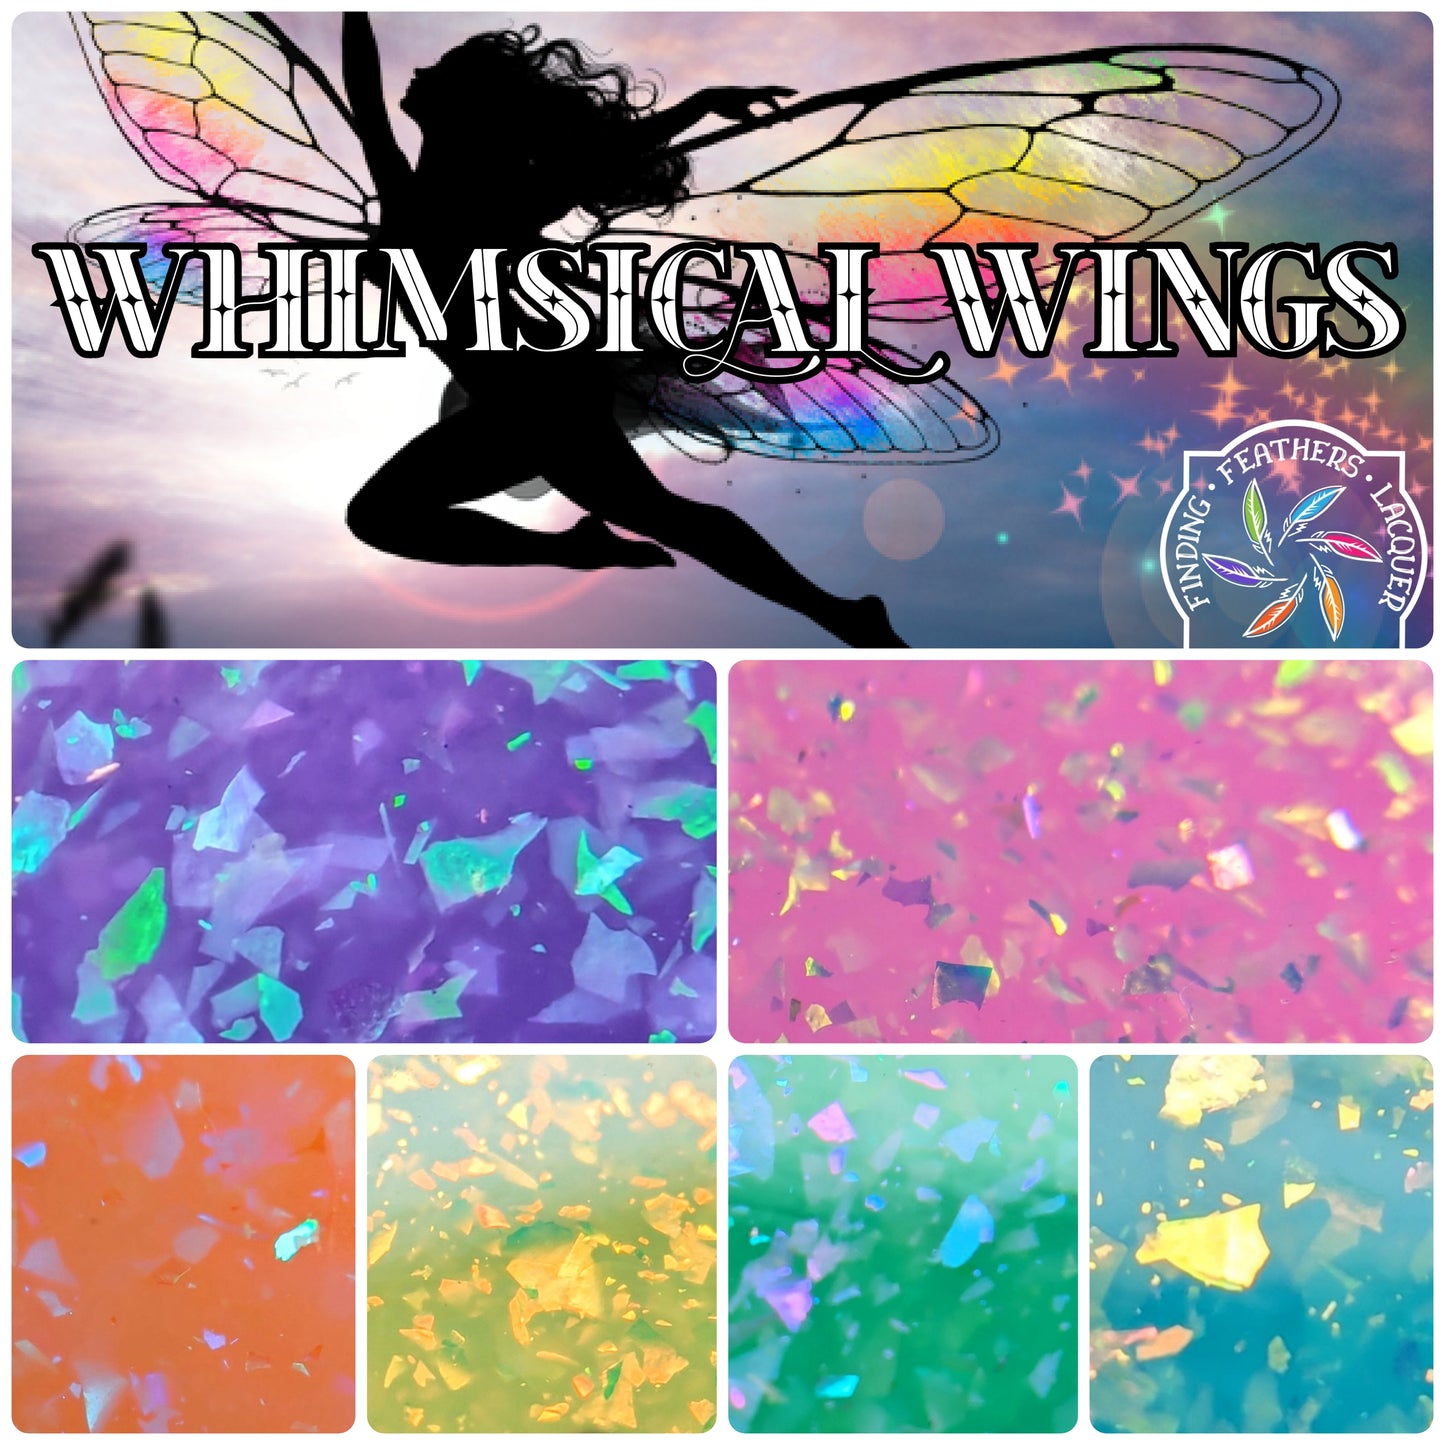 Full Whimsical Wings Collection